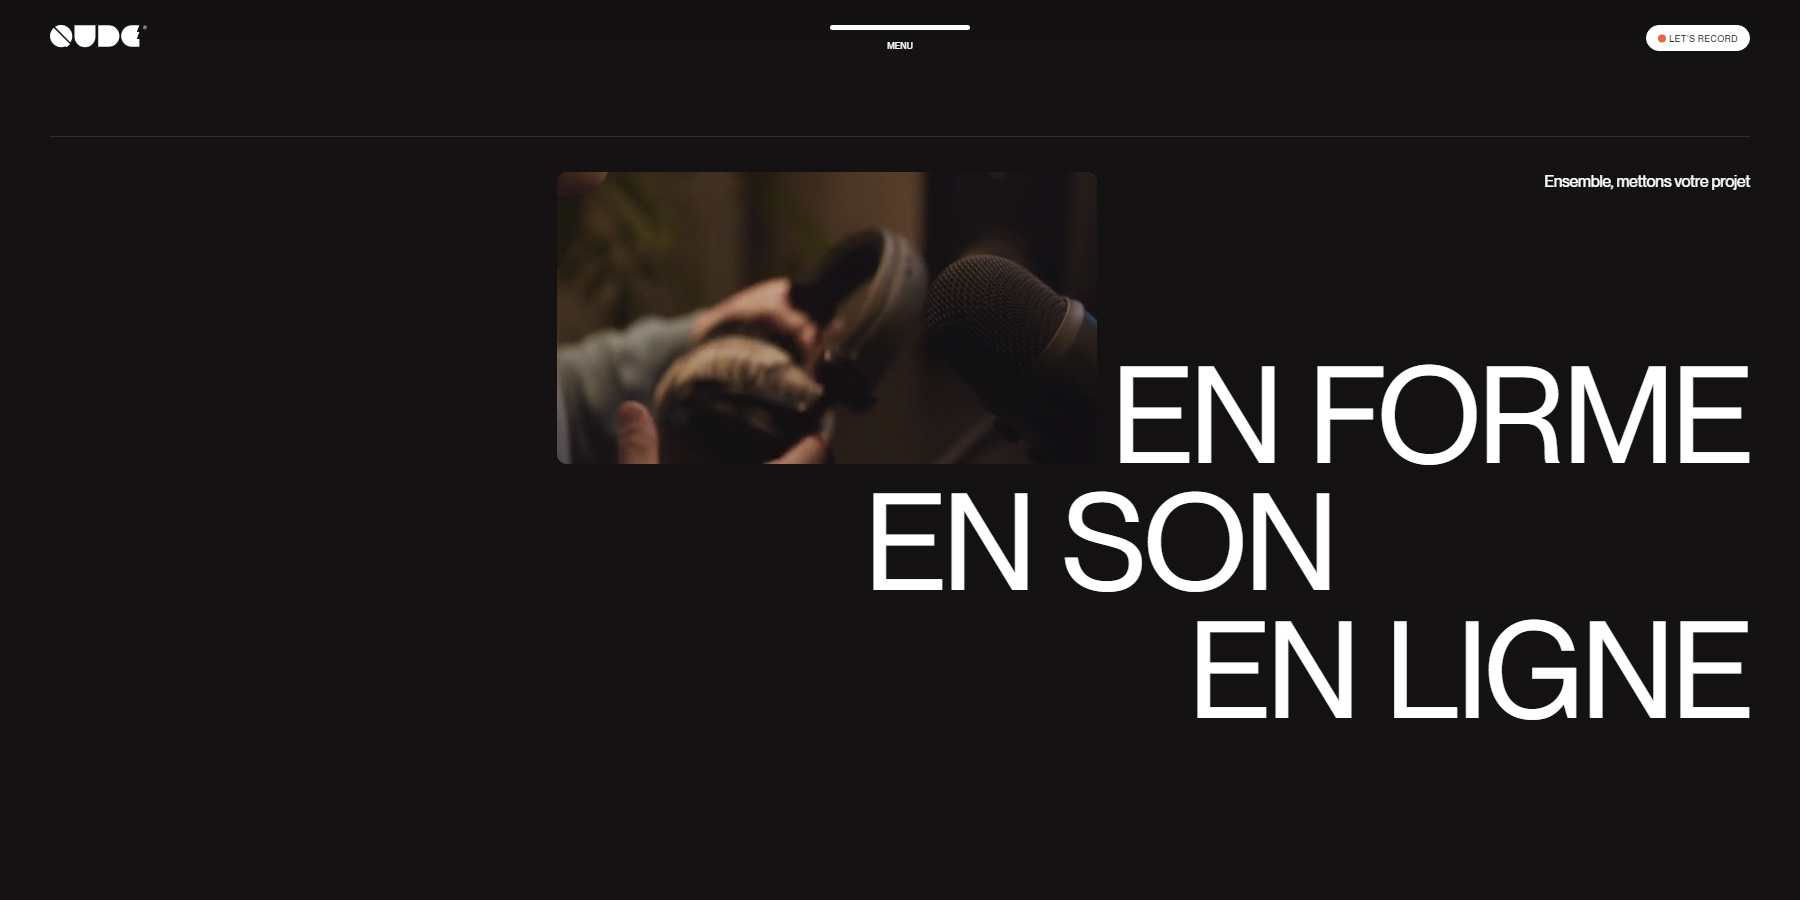 Qude - Website of the Day